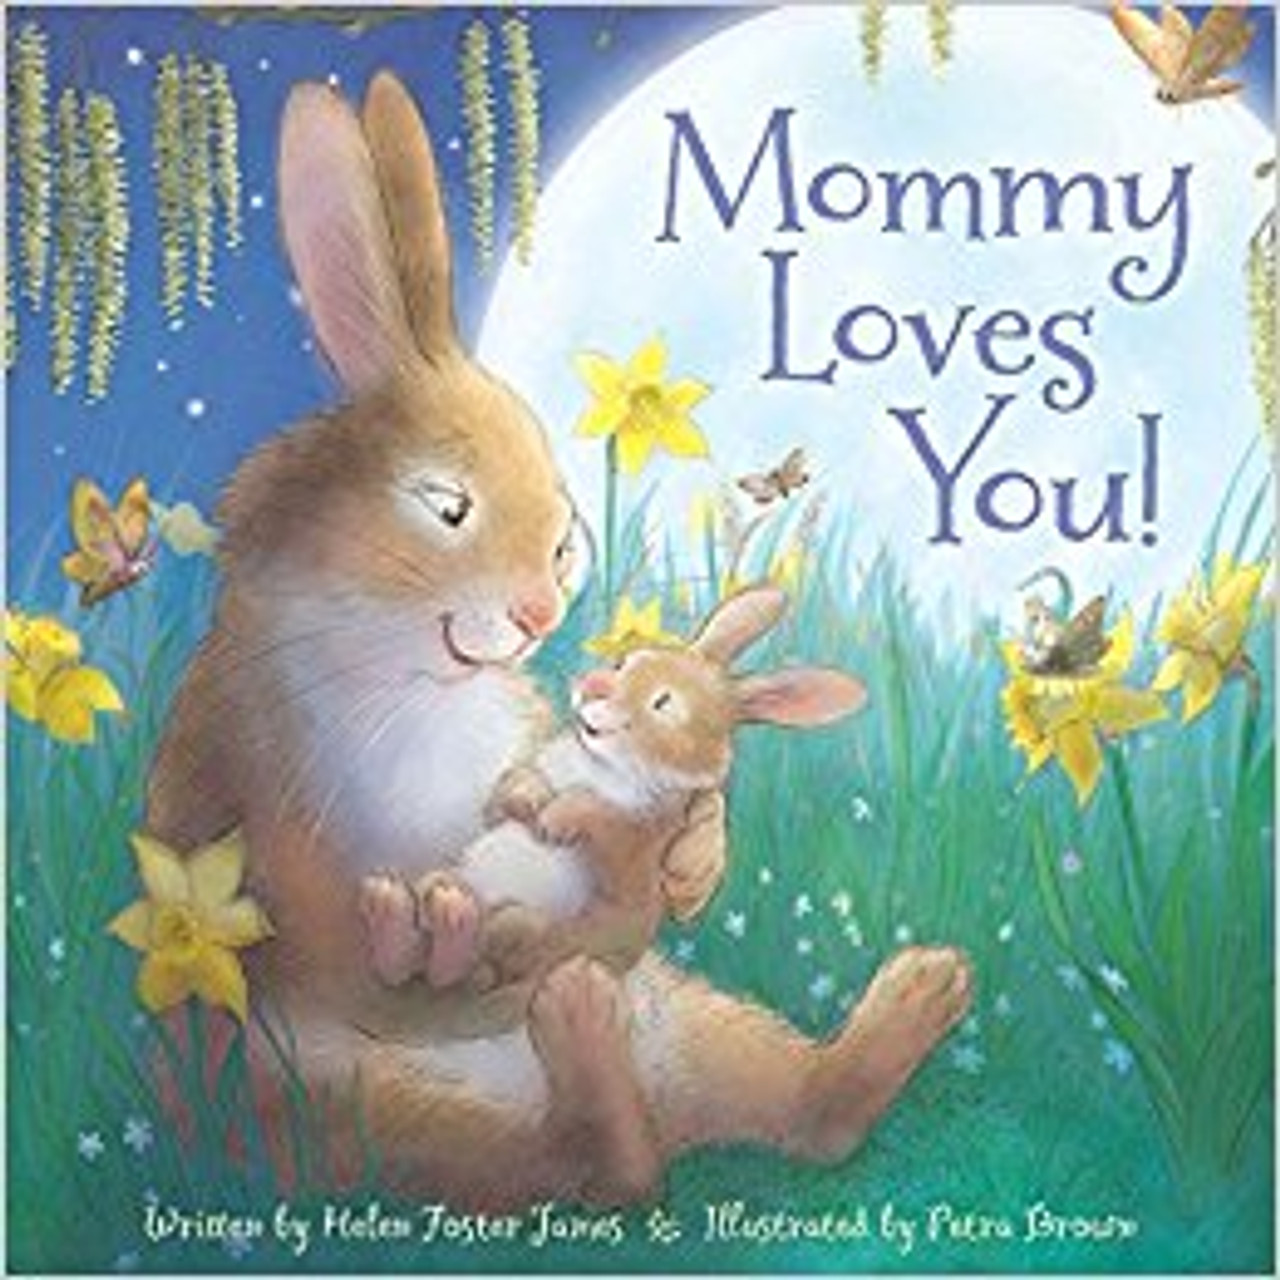 Mommy Loves You! by Helen Foster James